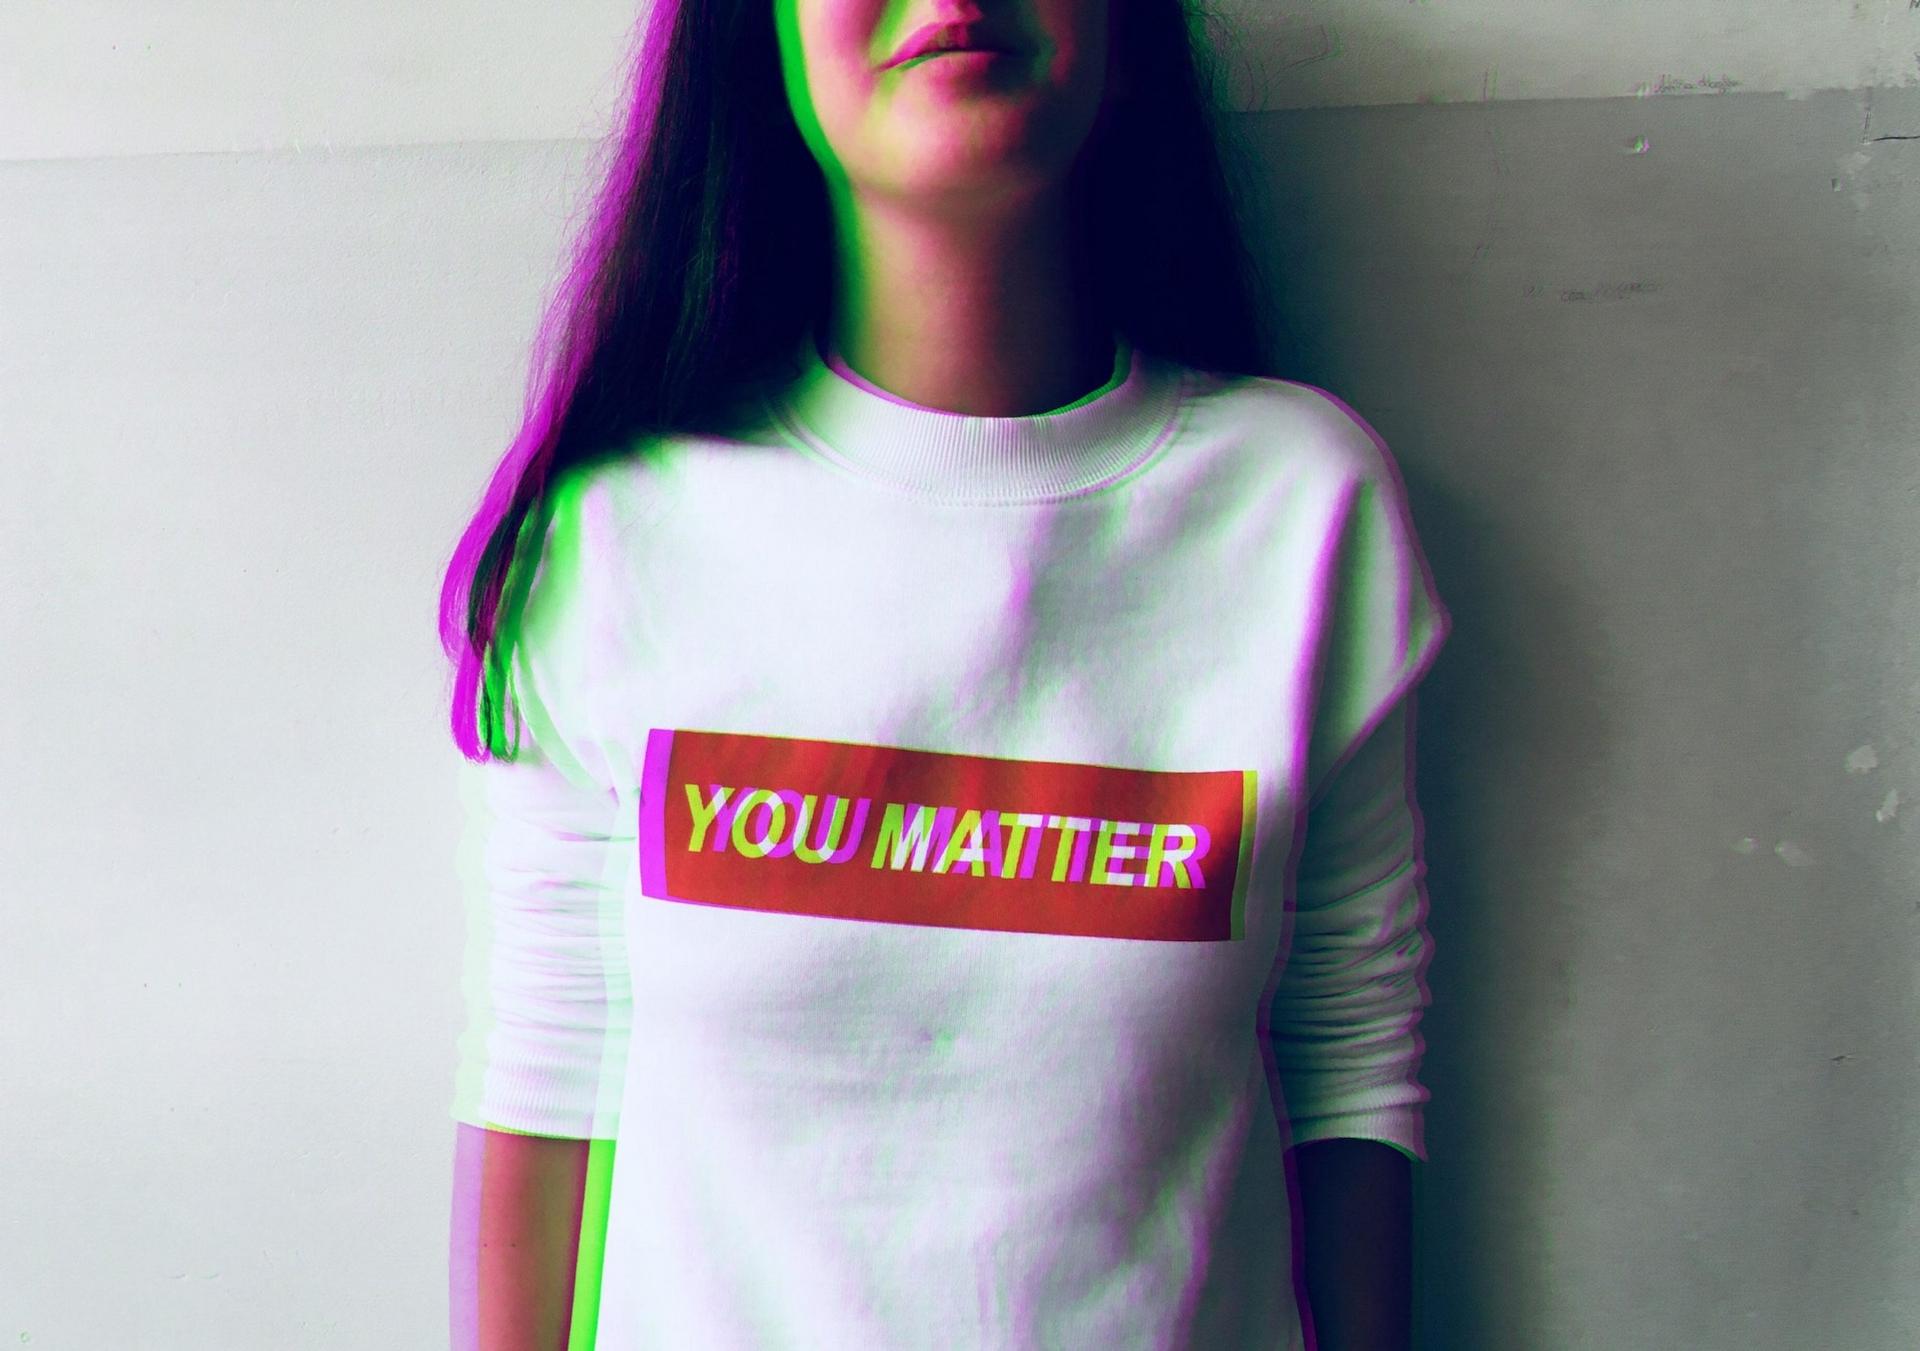 A person wearing a white t-shirt with text - You matter